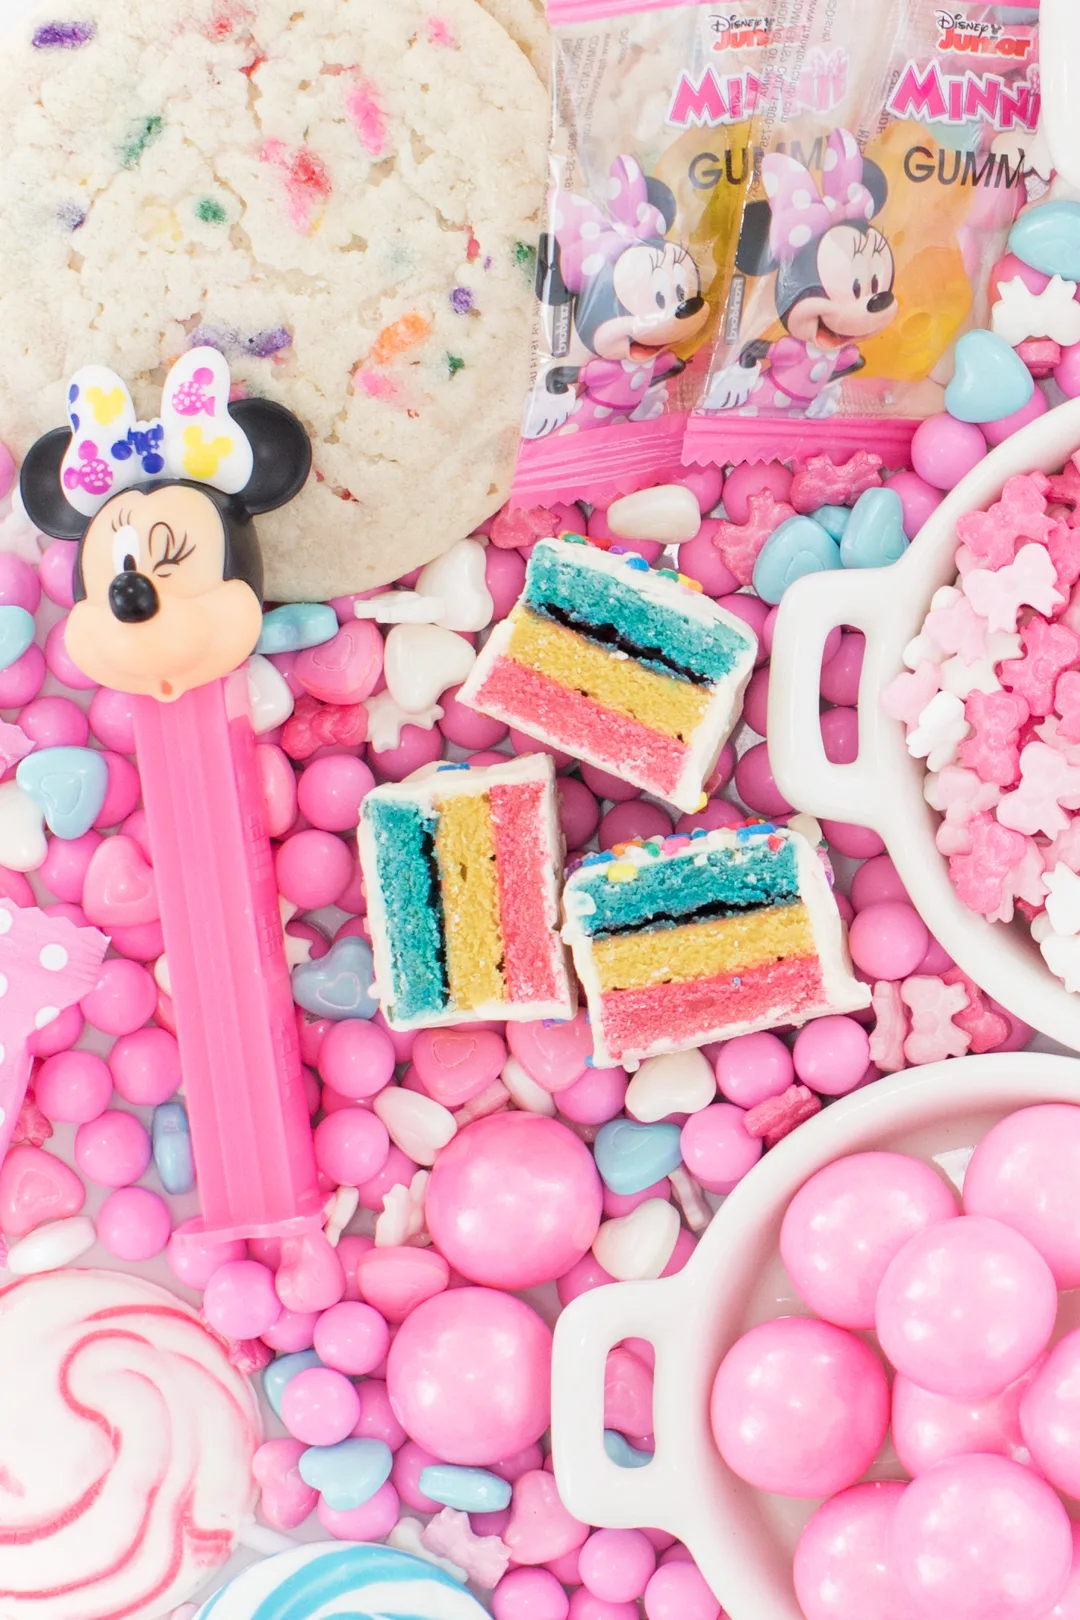 candy tray up close with minnie mouse pez dispenser and cakebites party cake